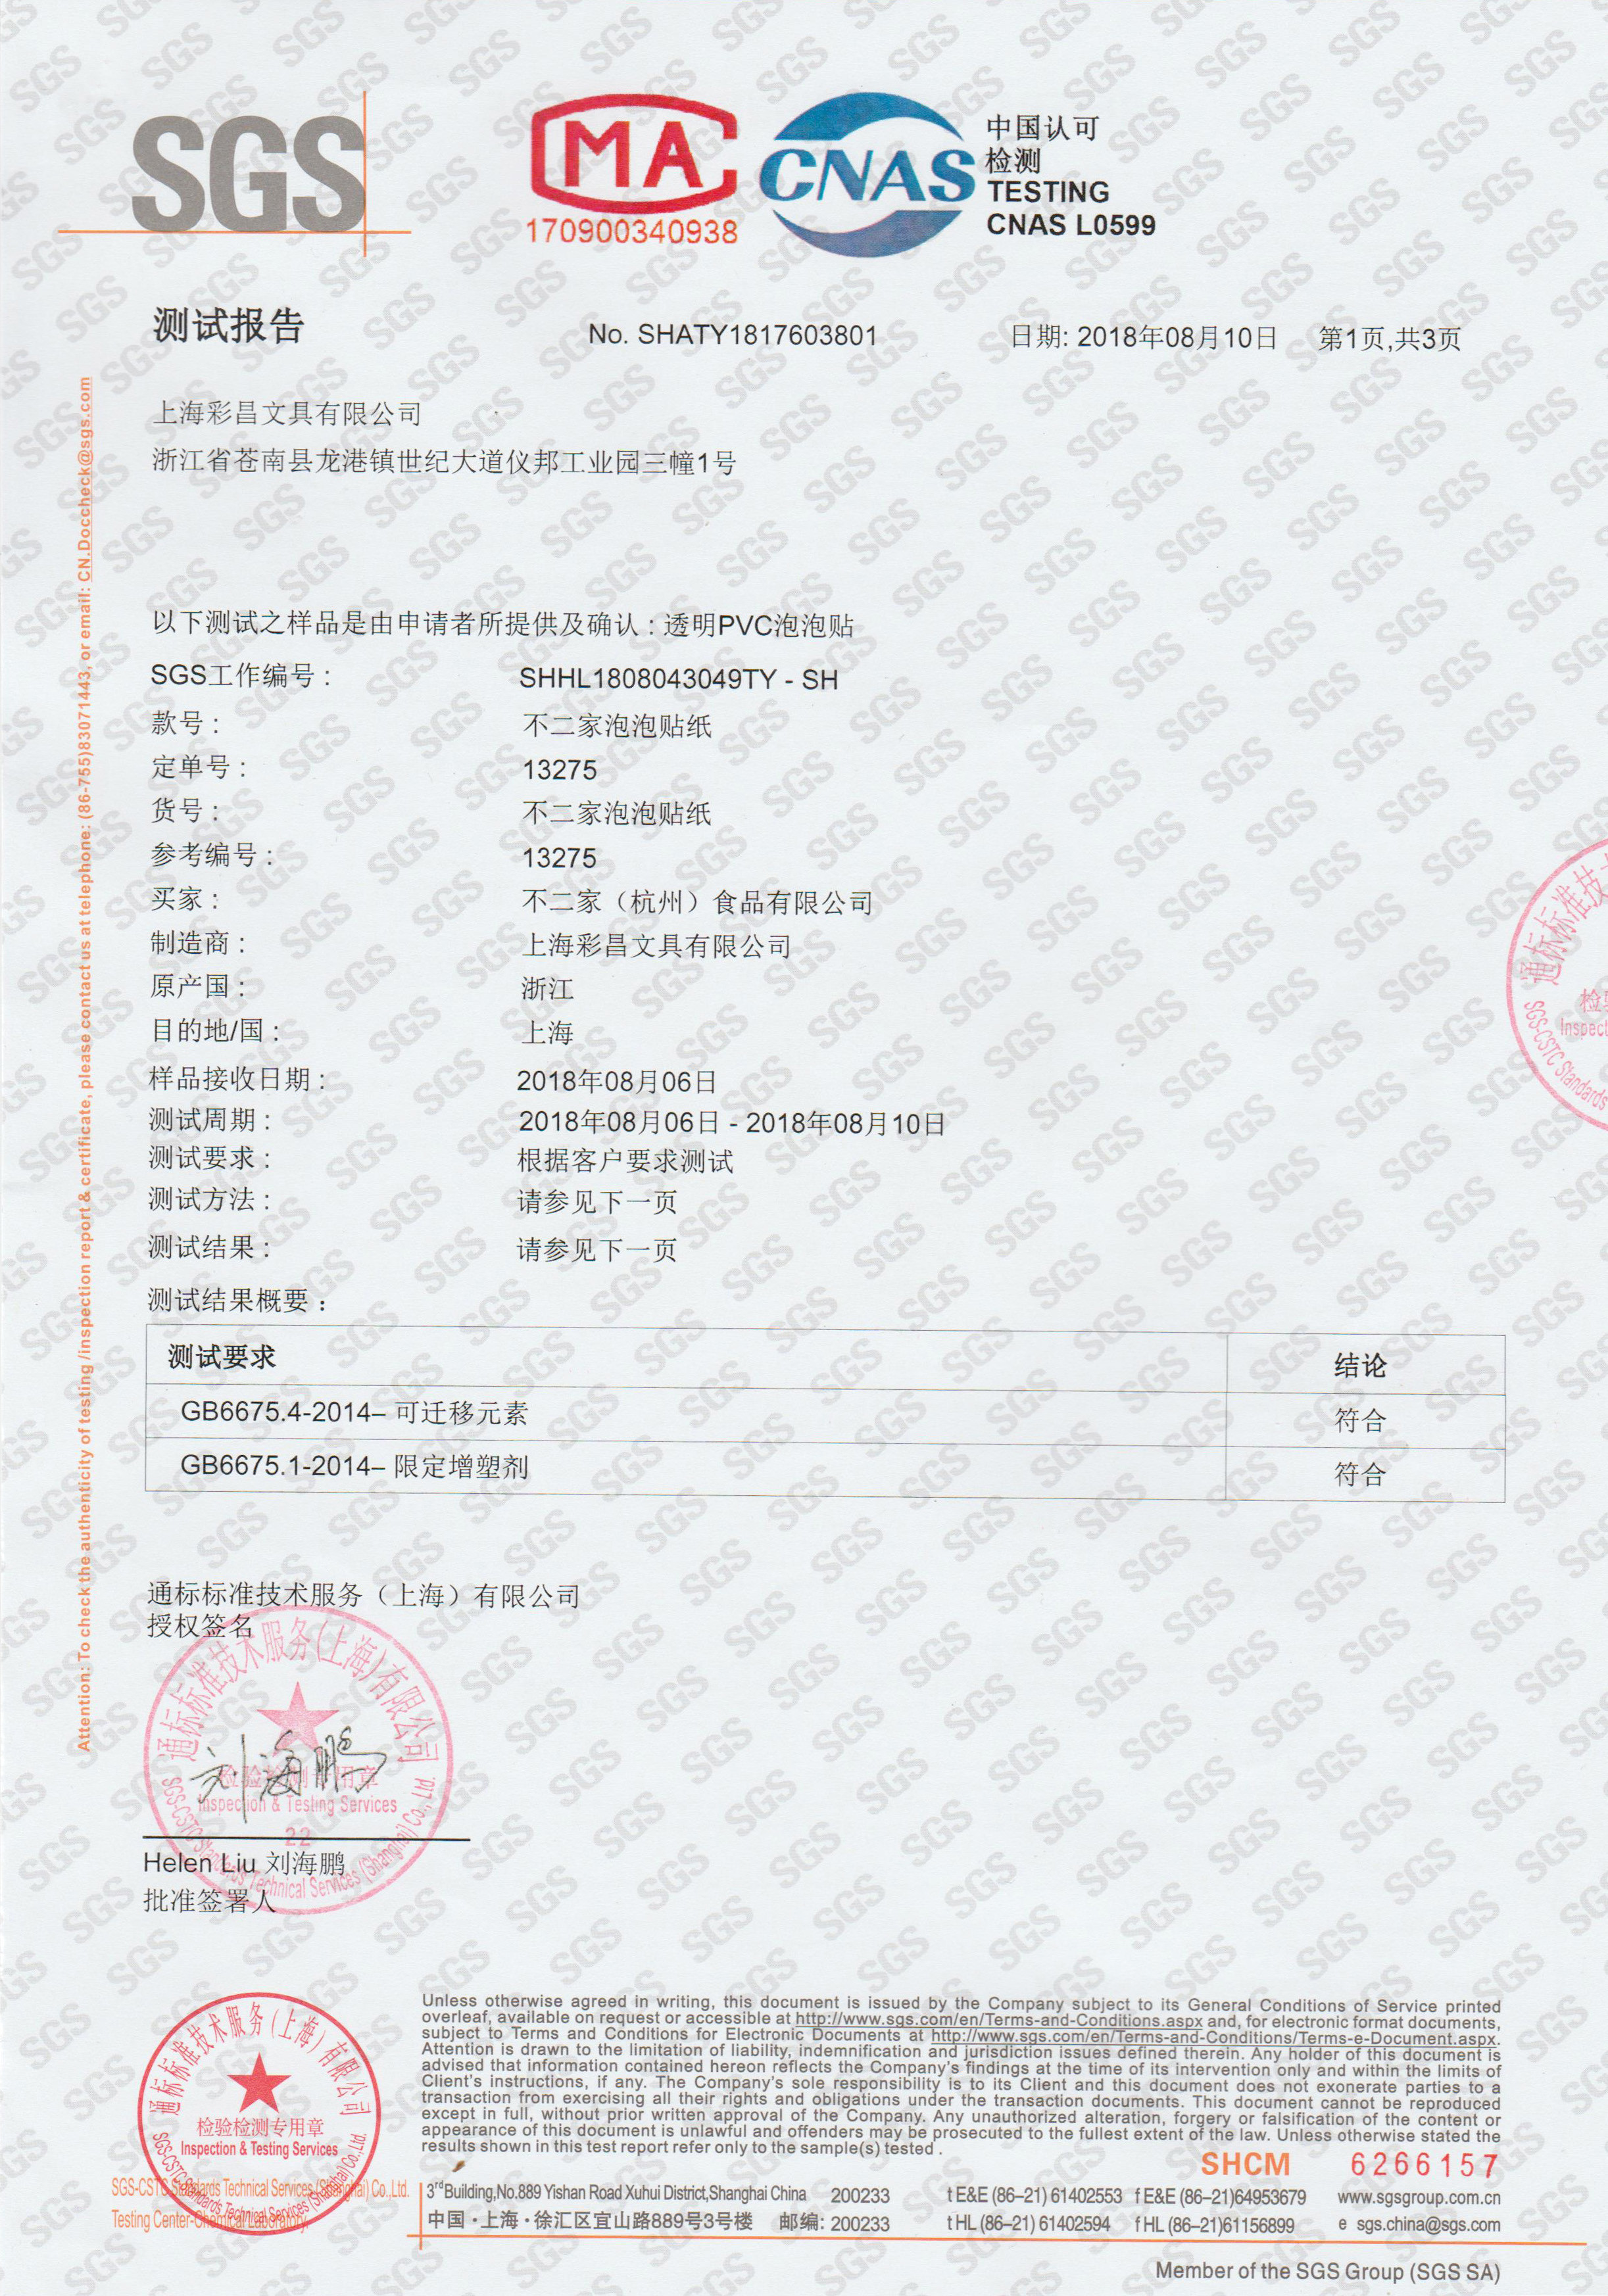 Shanghai Caichang Stationery Co., Ltd Certifications